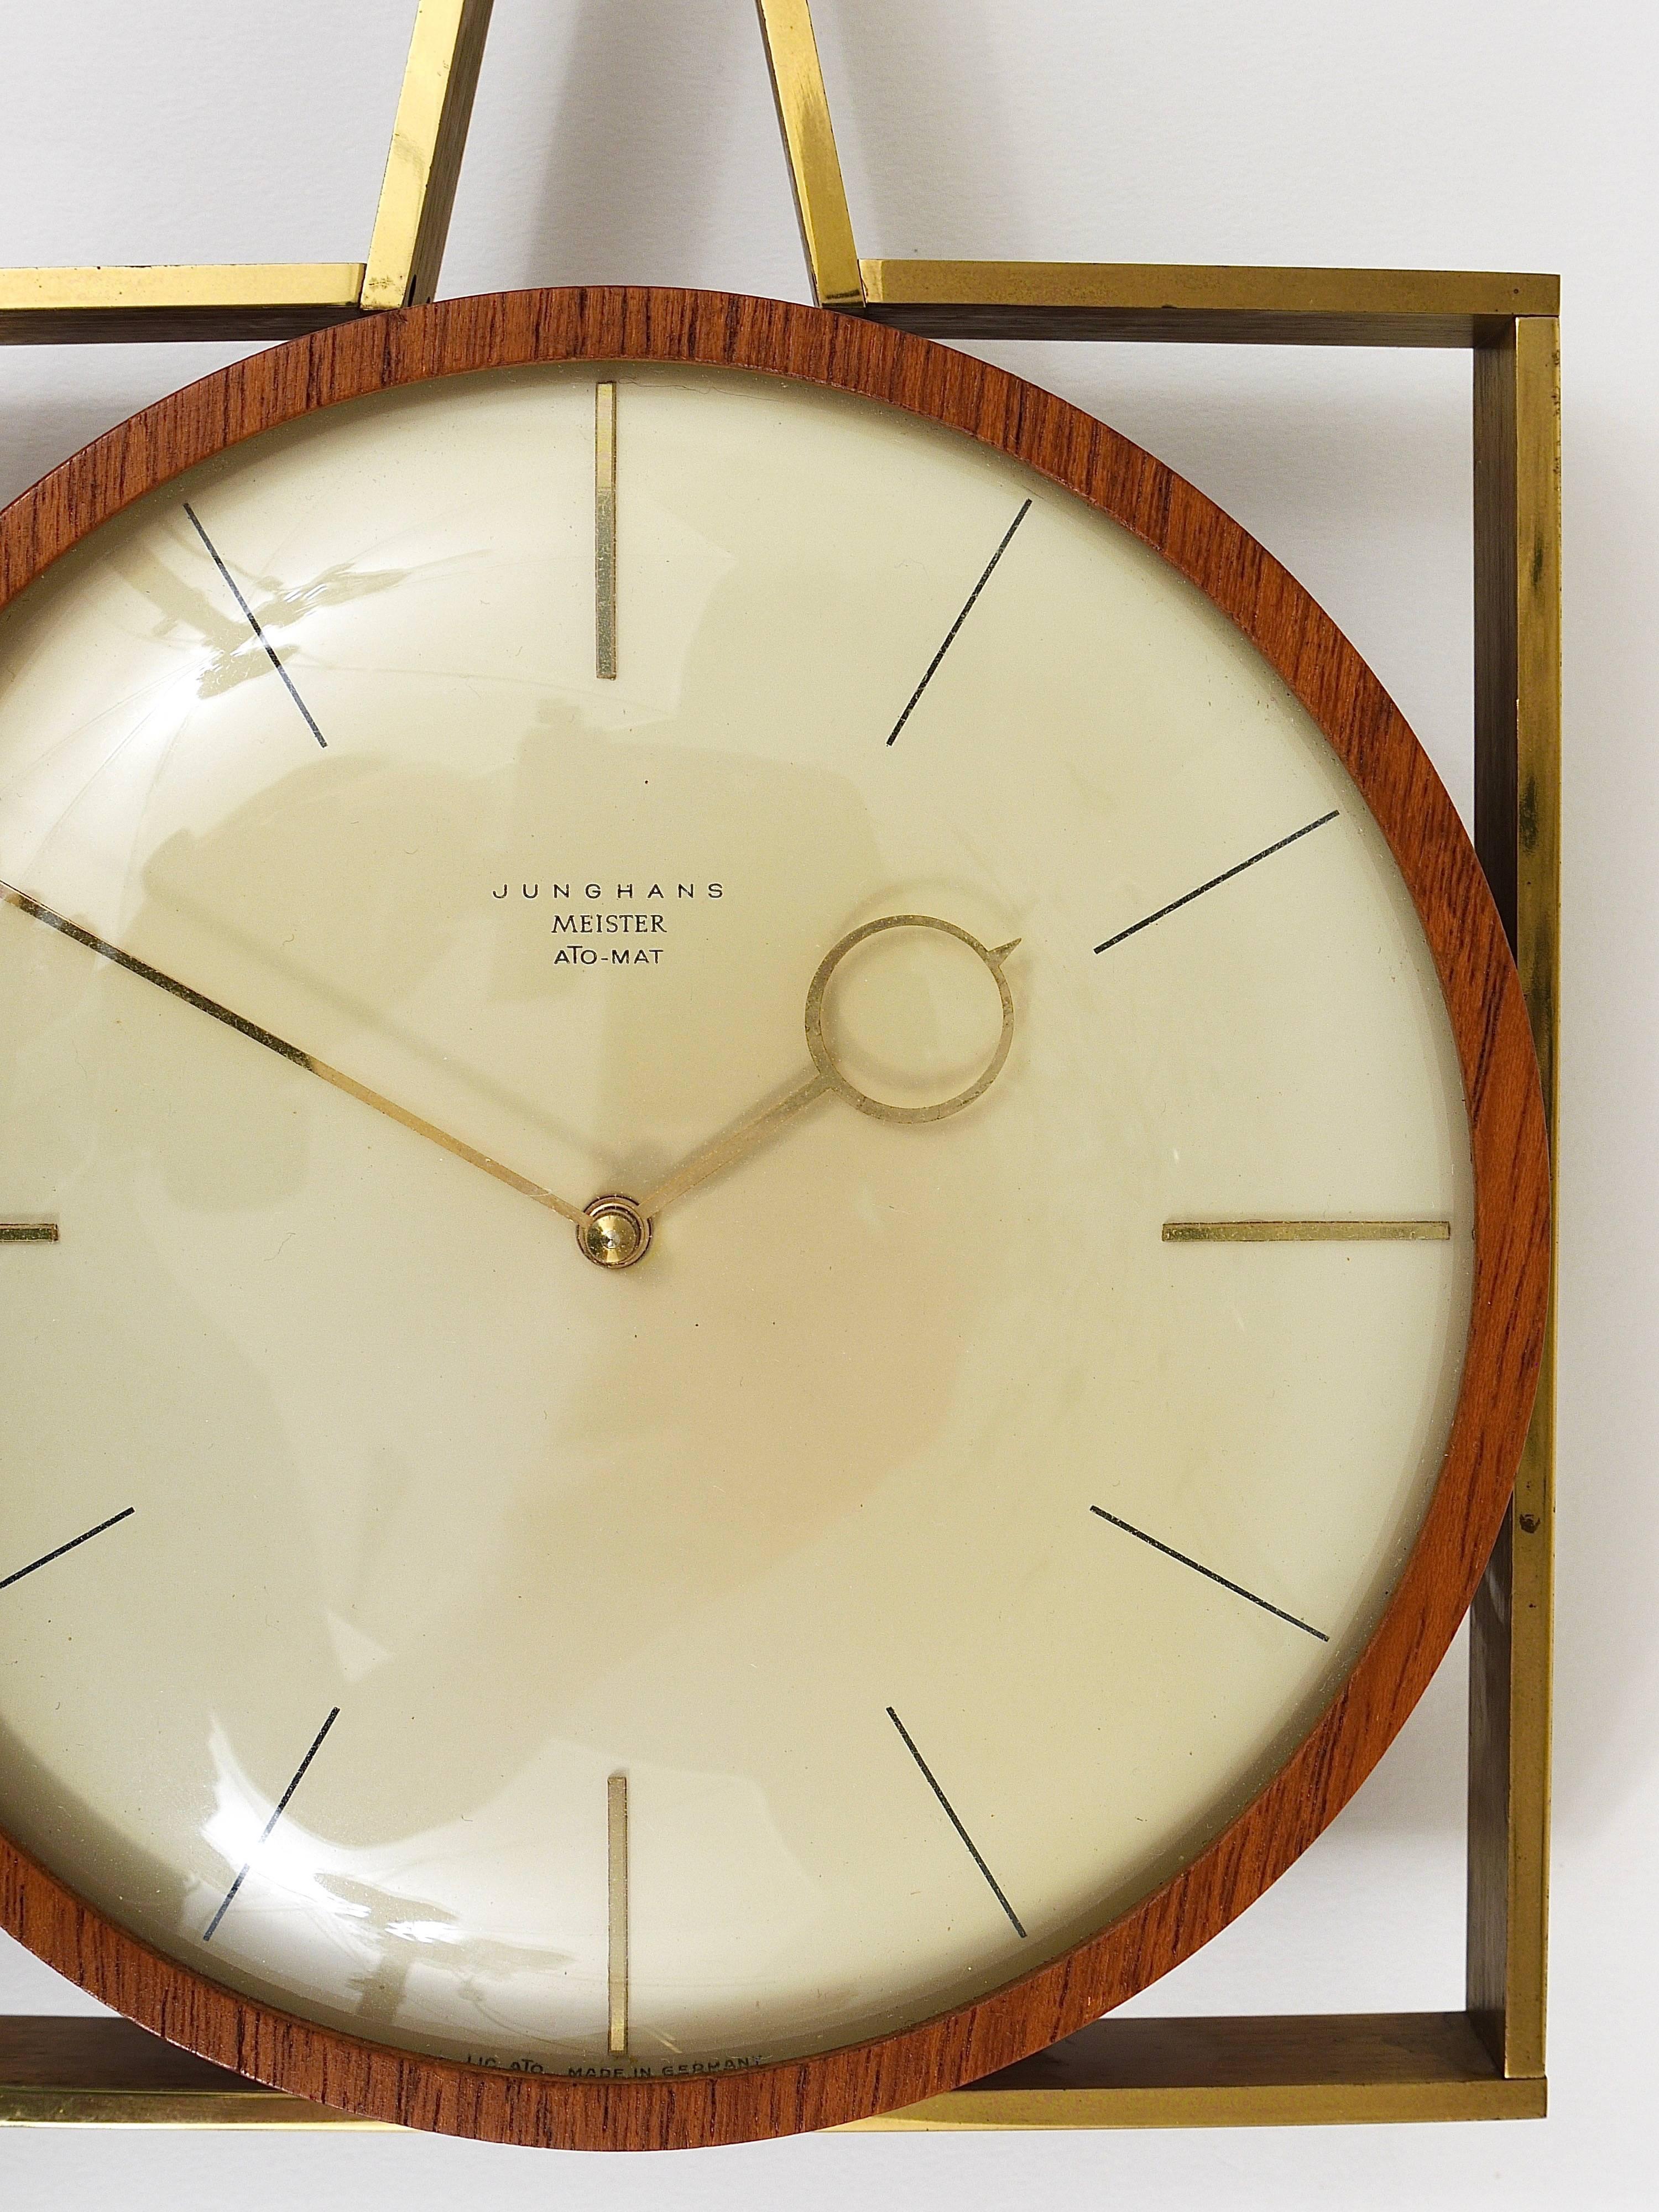 20th Century Elegant Mid-Century Junghans Meister Ato-Mat Teak and Brass Wall Clock, Germany